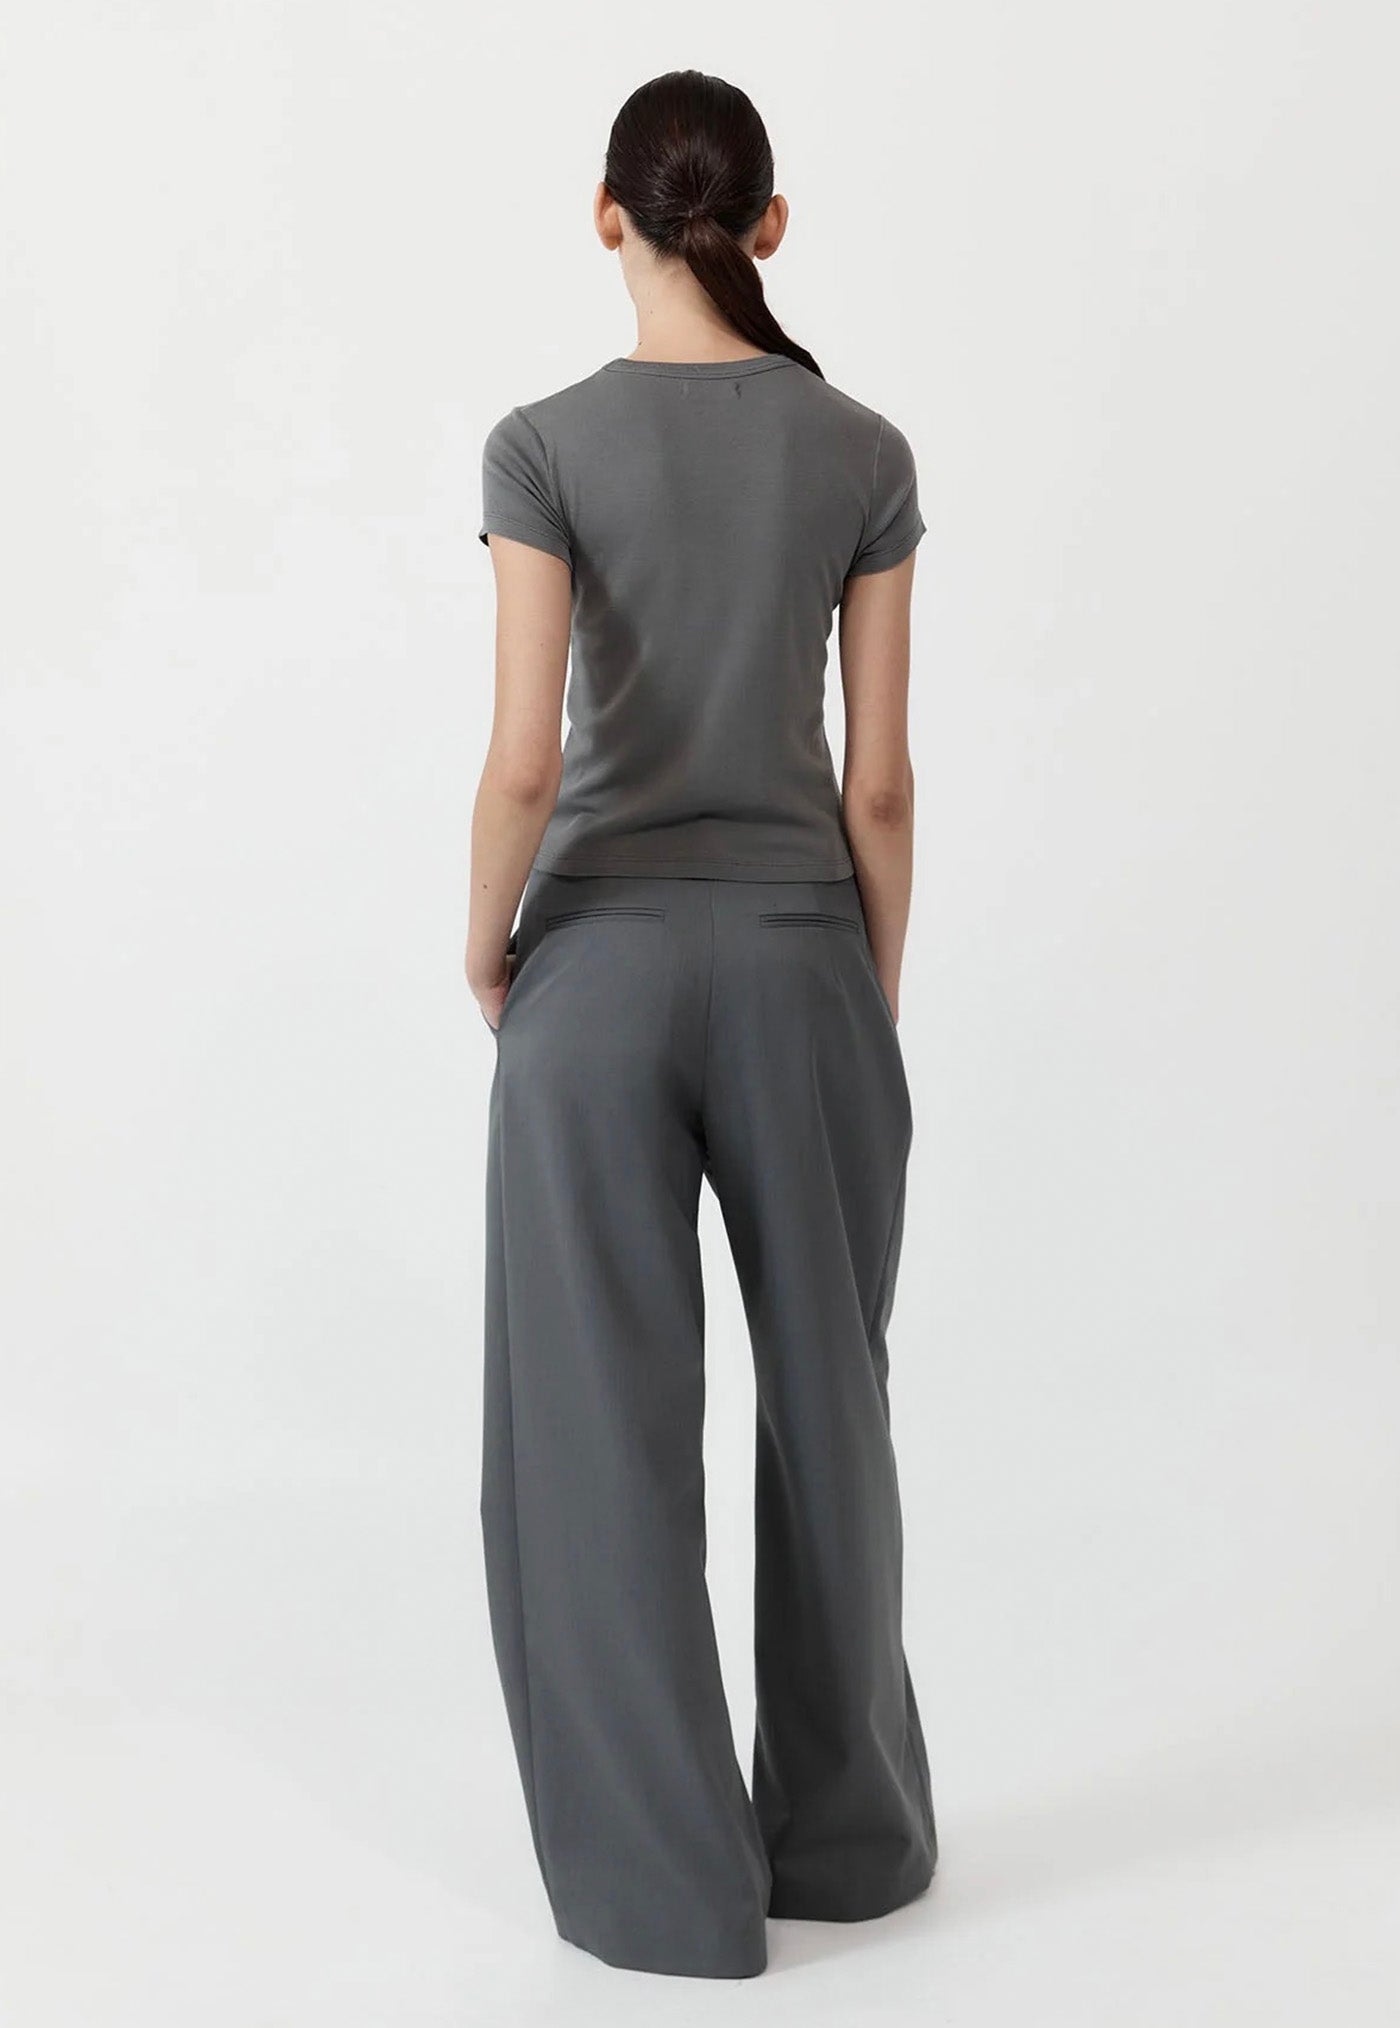 Homme Pleat Pants - Pewter Grey sold by Angel Divine